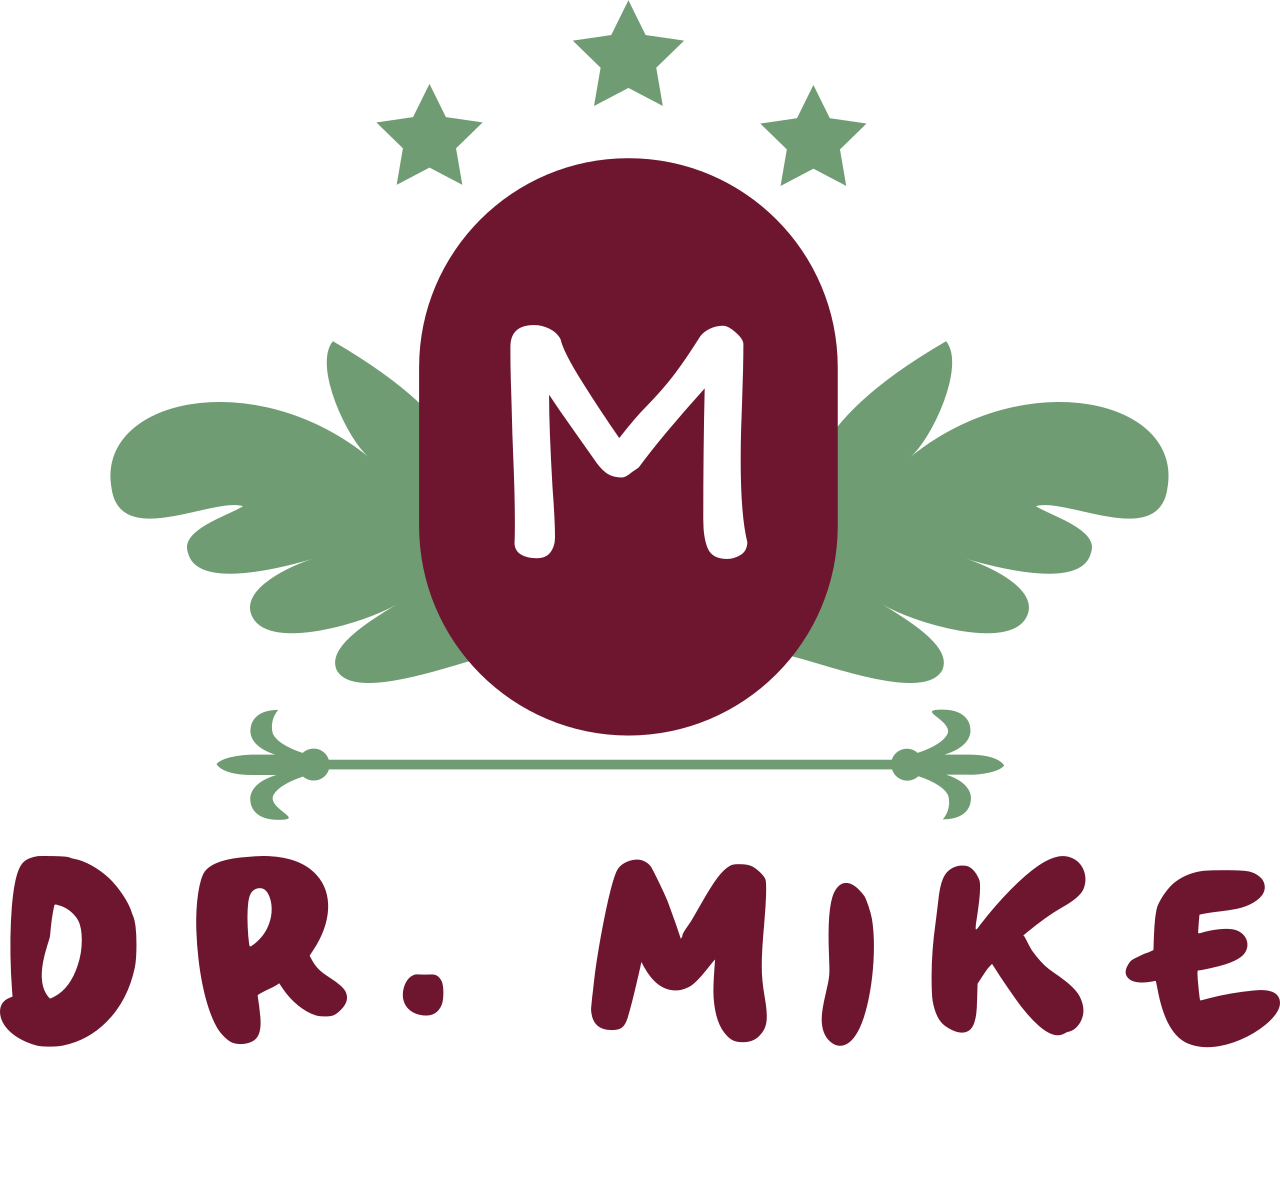 Dr. Mike's logo